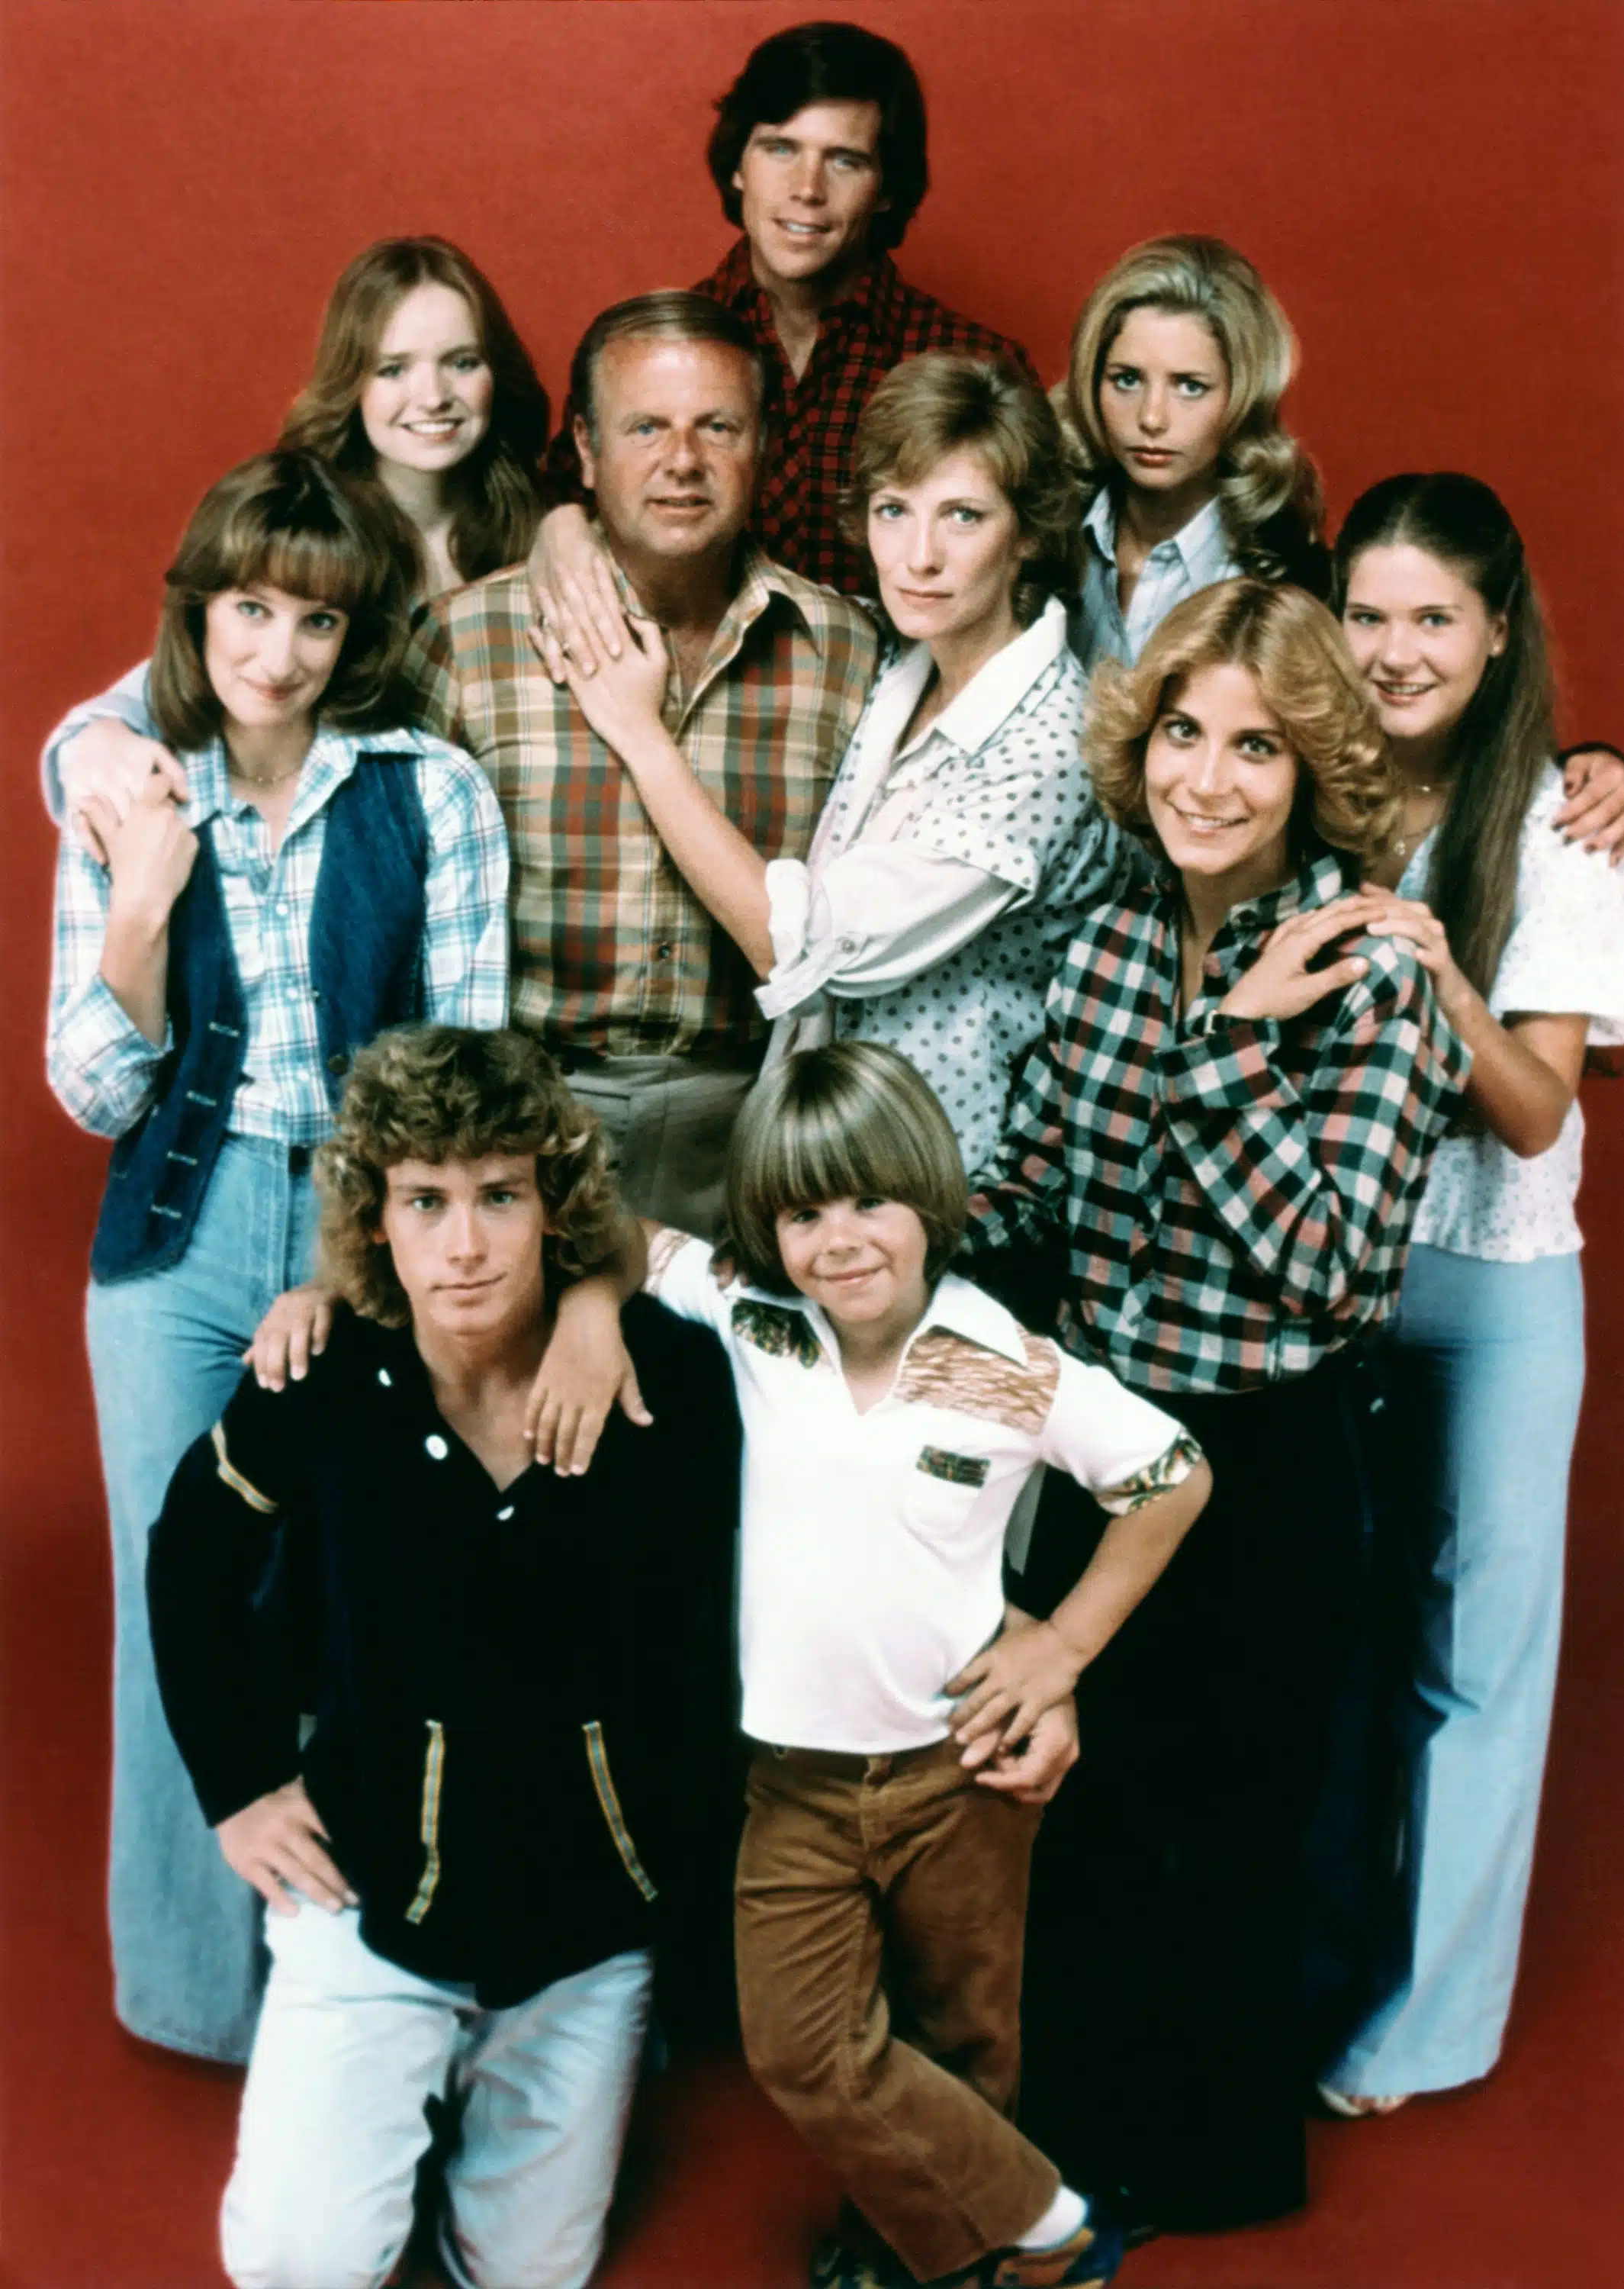 Adam Rich's 'Eight Is Enough' co-star Willie Aames 'gutted' after his  death: 'Lifelong friend